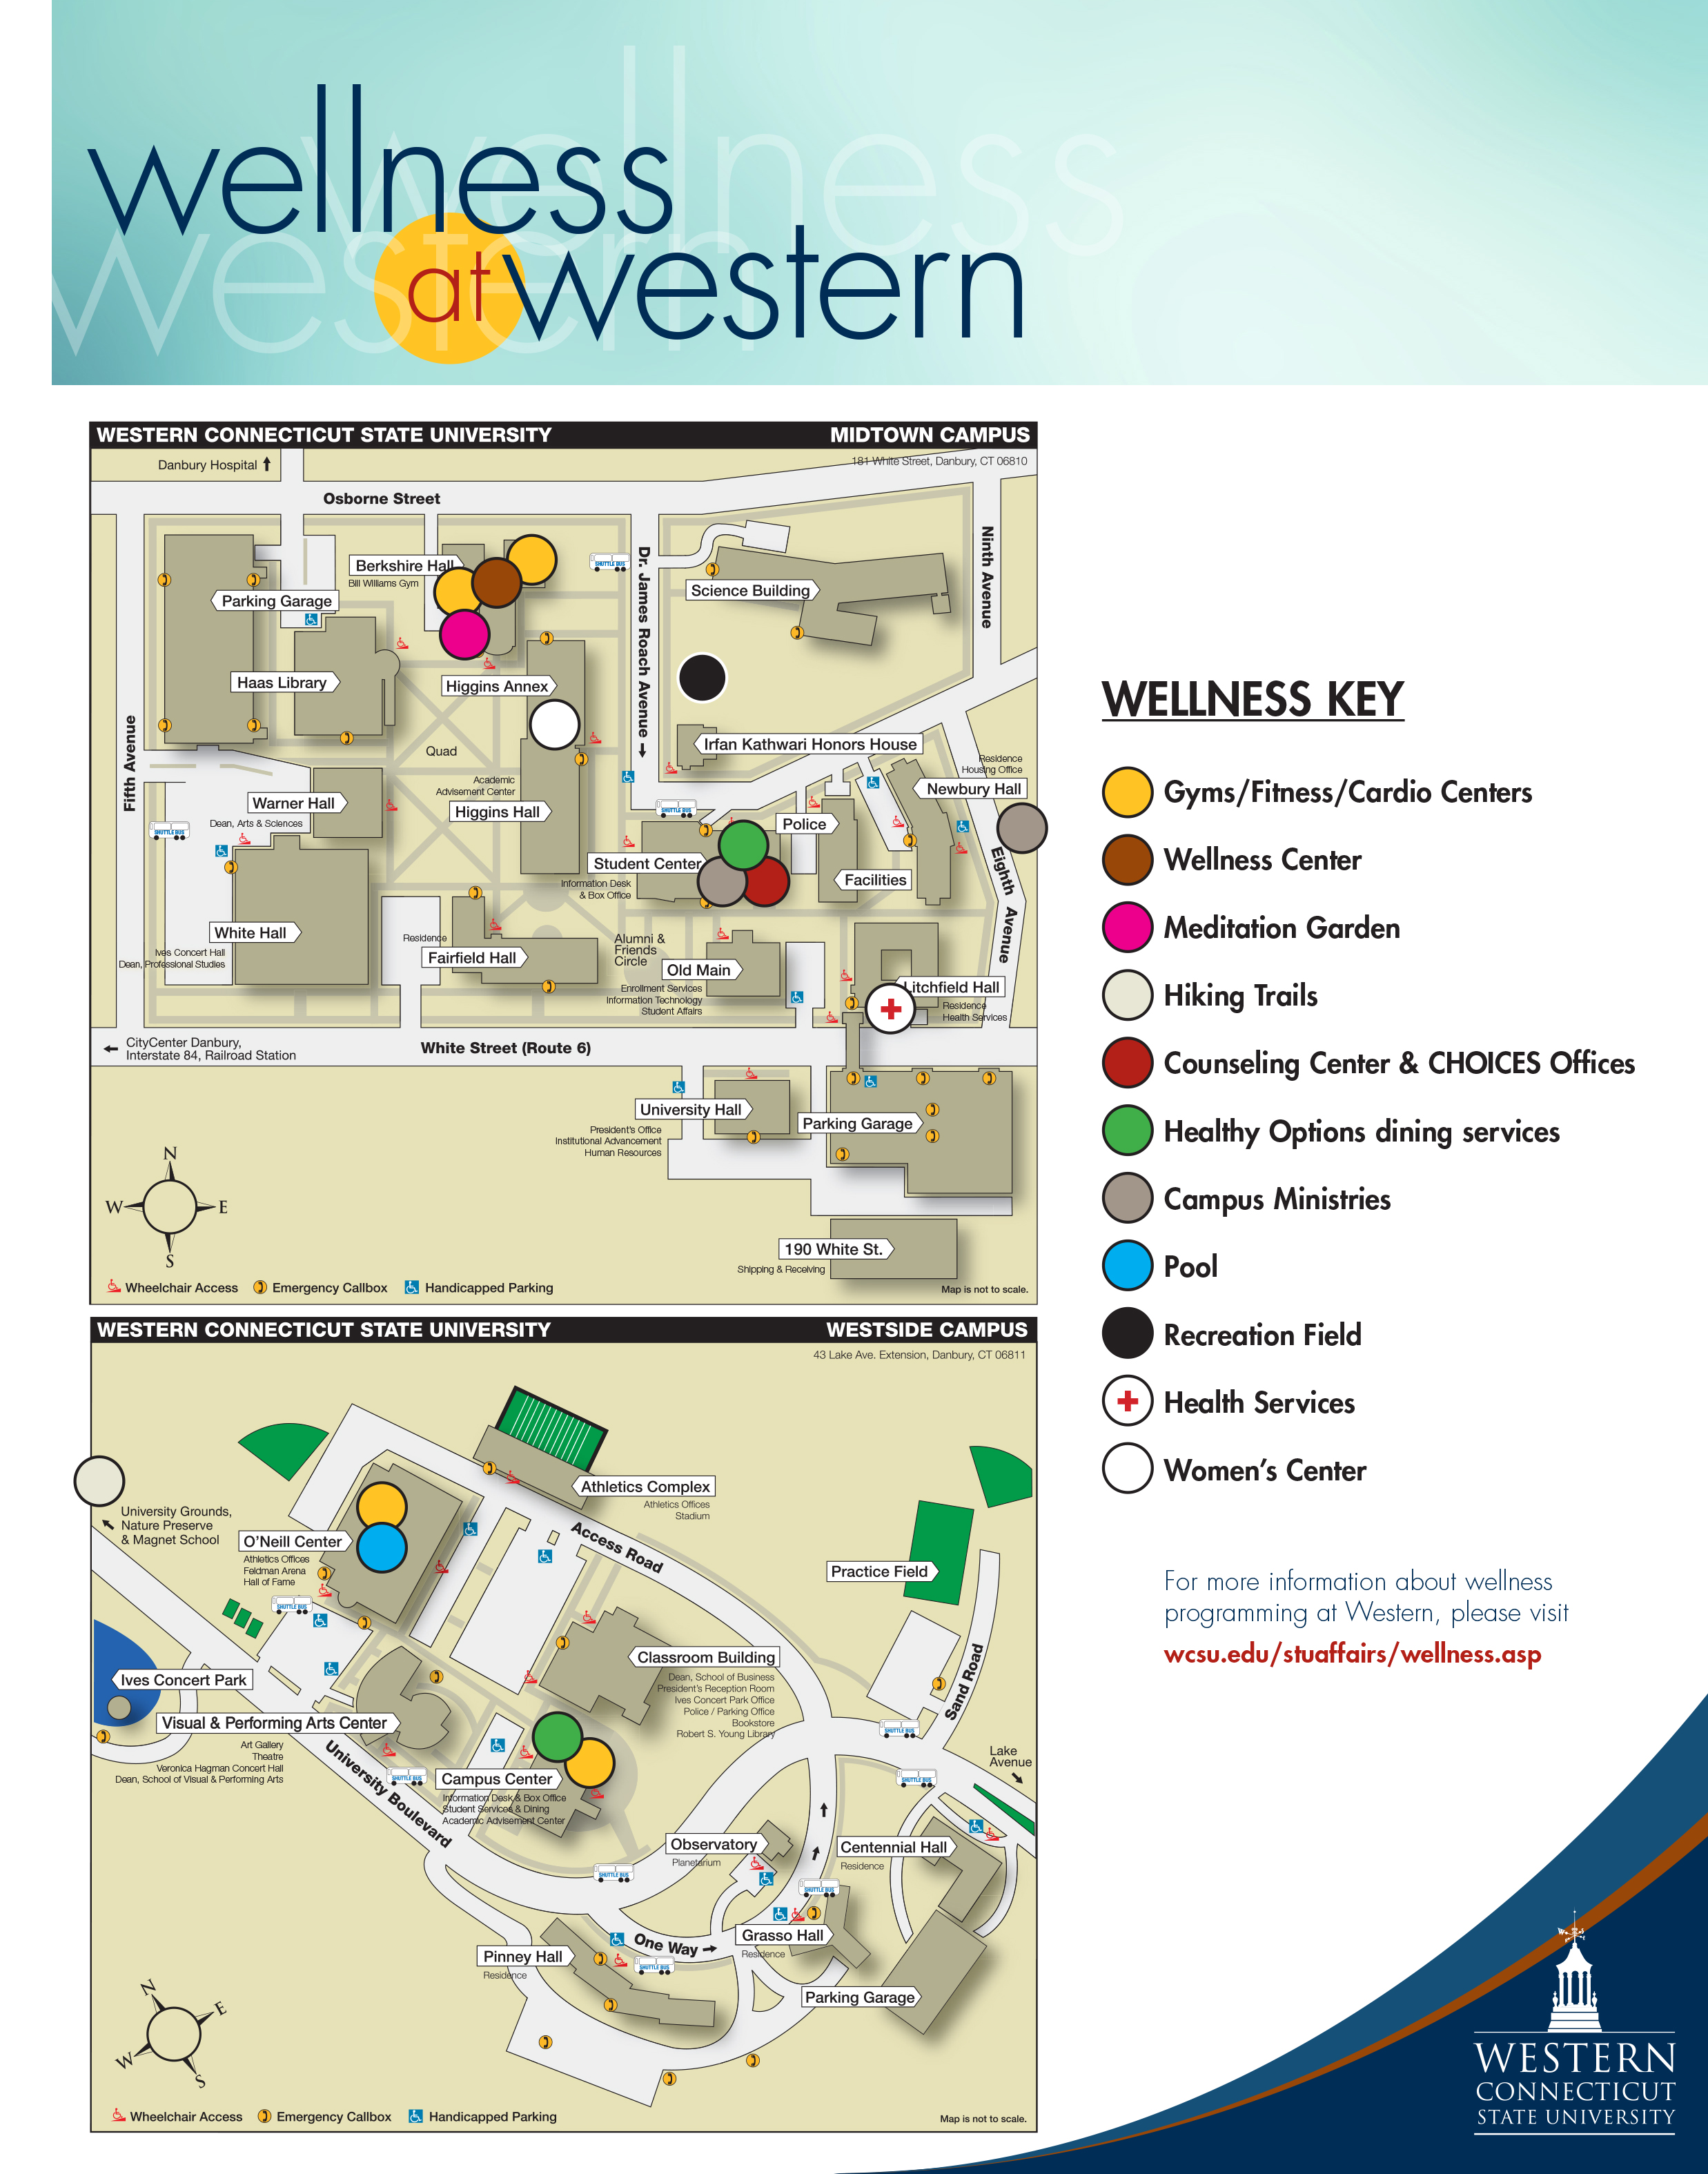 Wellness at Western map of the campus listing "wellness" locations